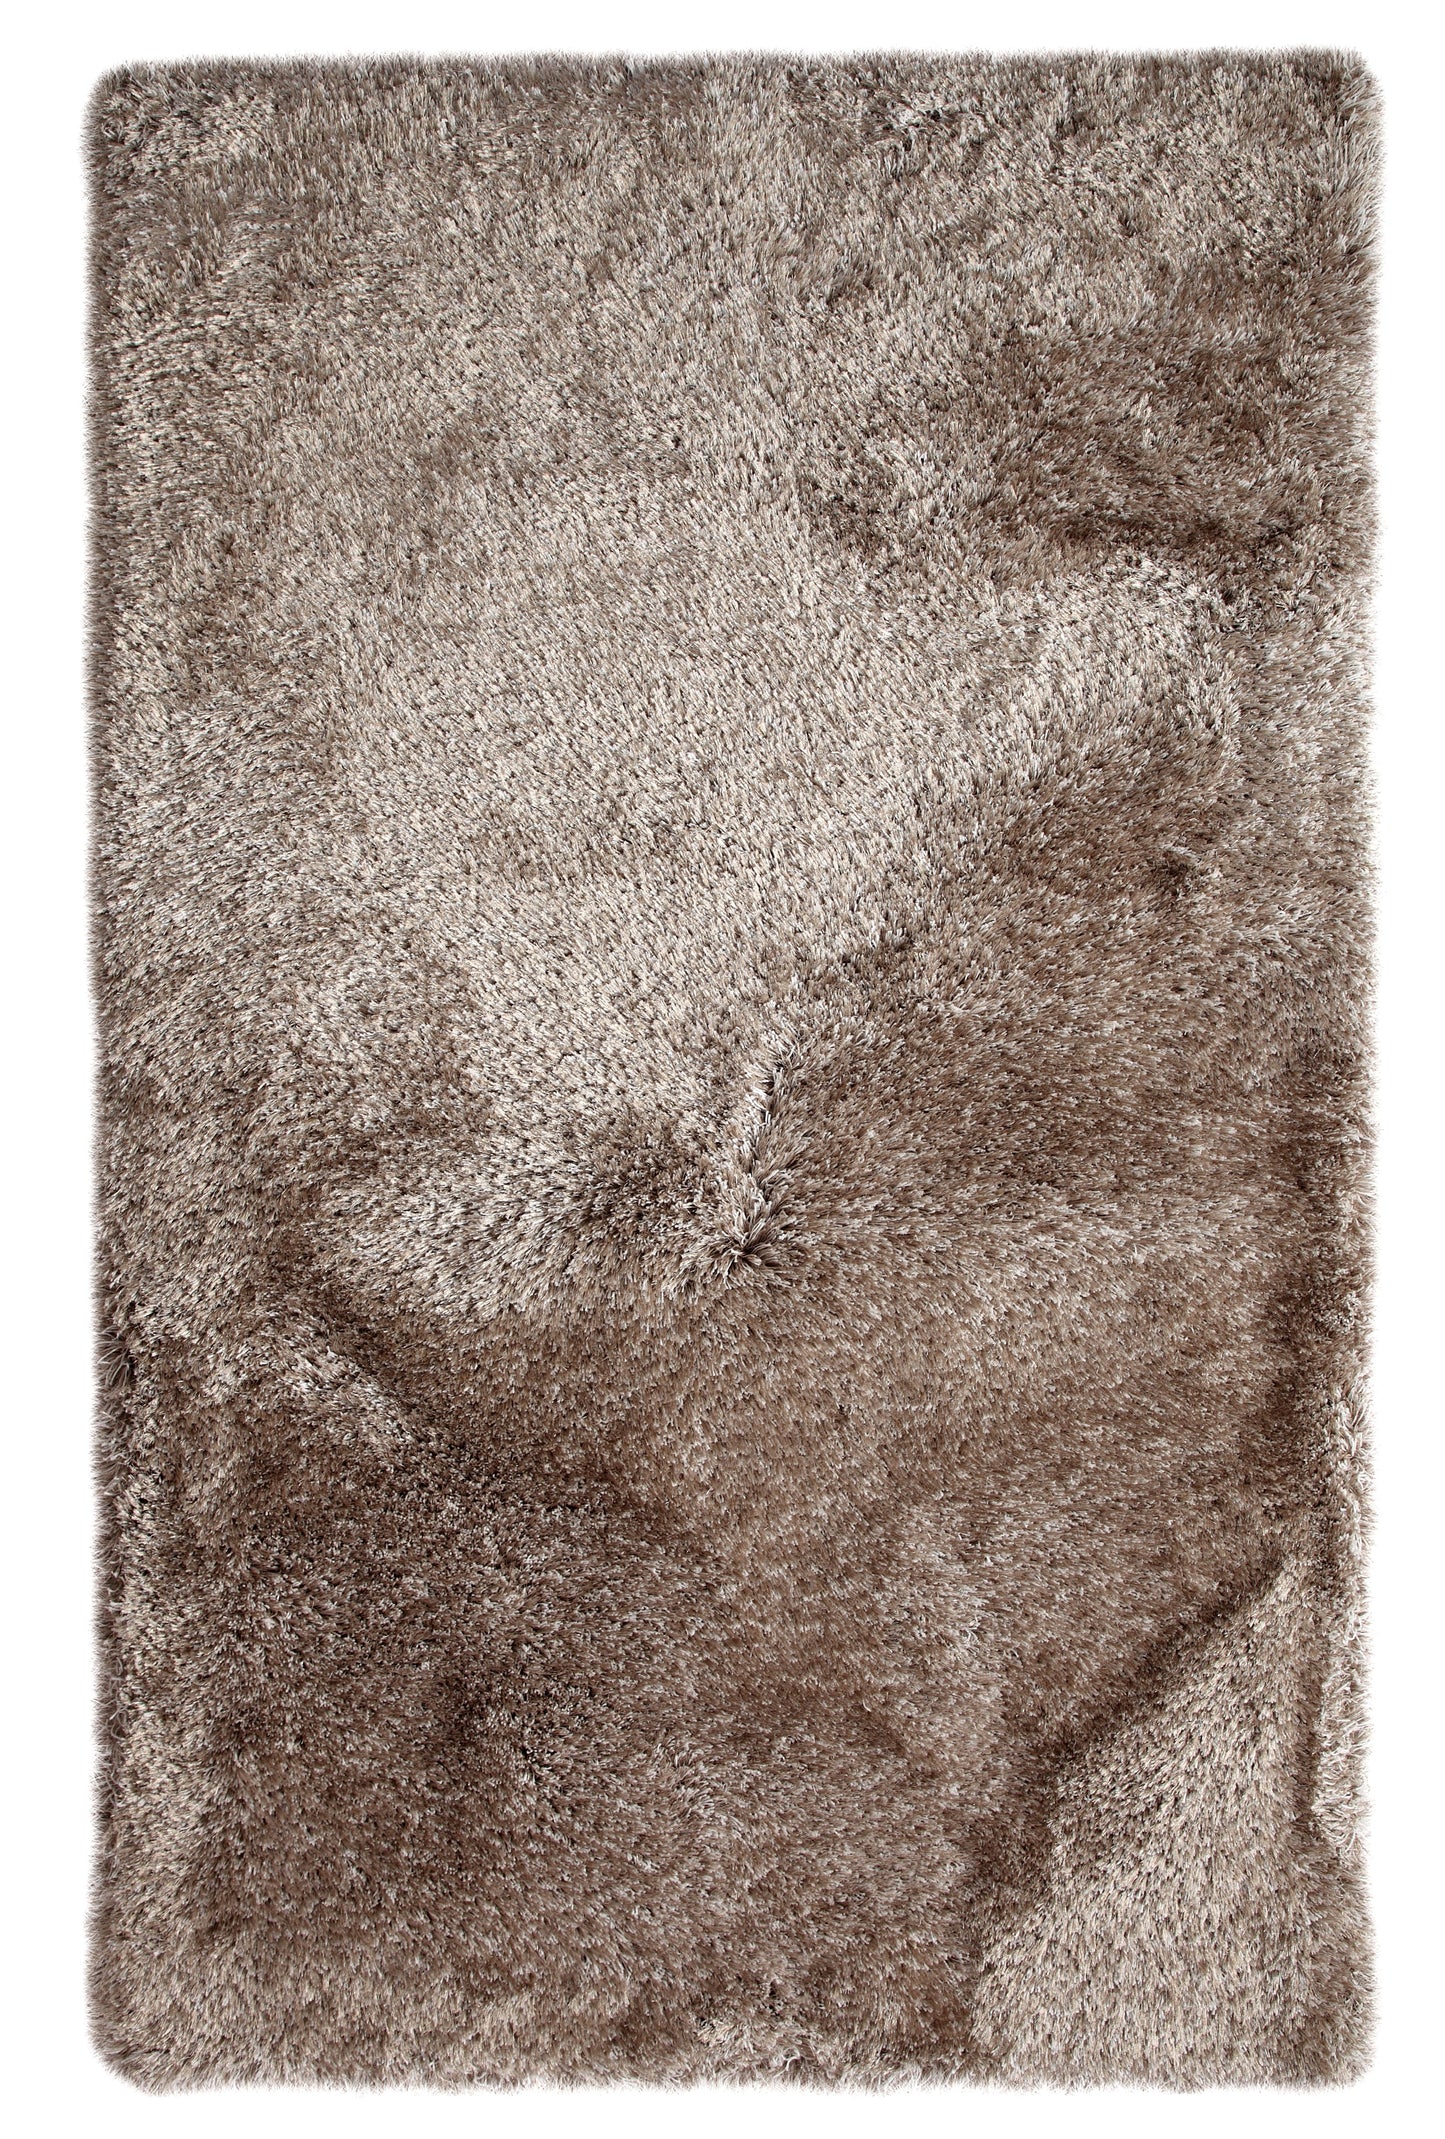 Dynamic Rugs LUXE 4201 Stone Area Rug